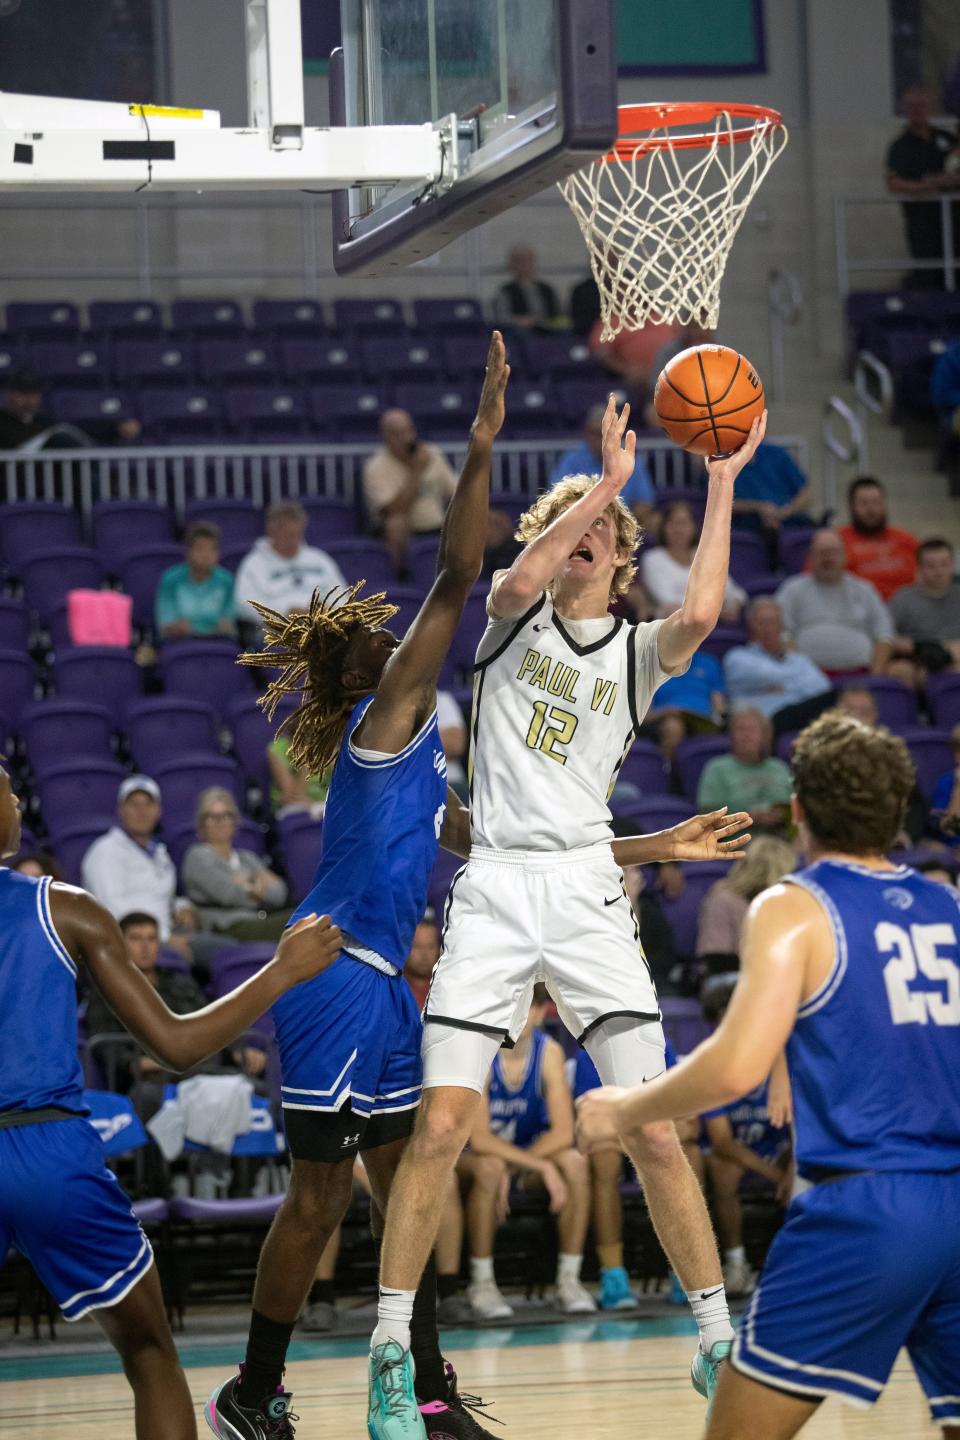 Garrett Sundra of Paul VI goes up for a shot against Canterbury in the City of Palms Classic on Saturday, Dec. 17, 2022, at Suncoast Credit Union Arena in Fort Myers.